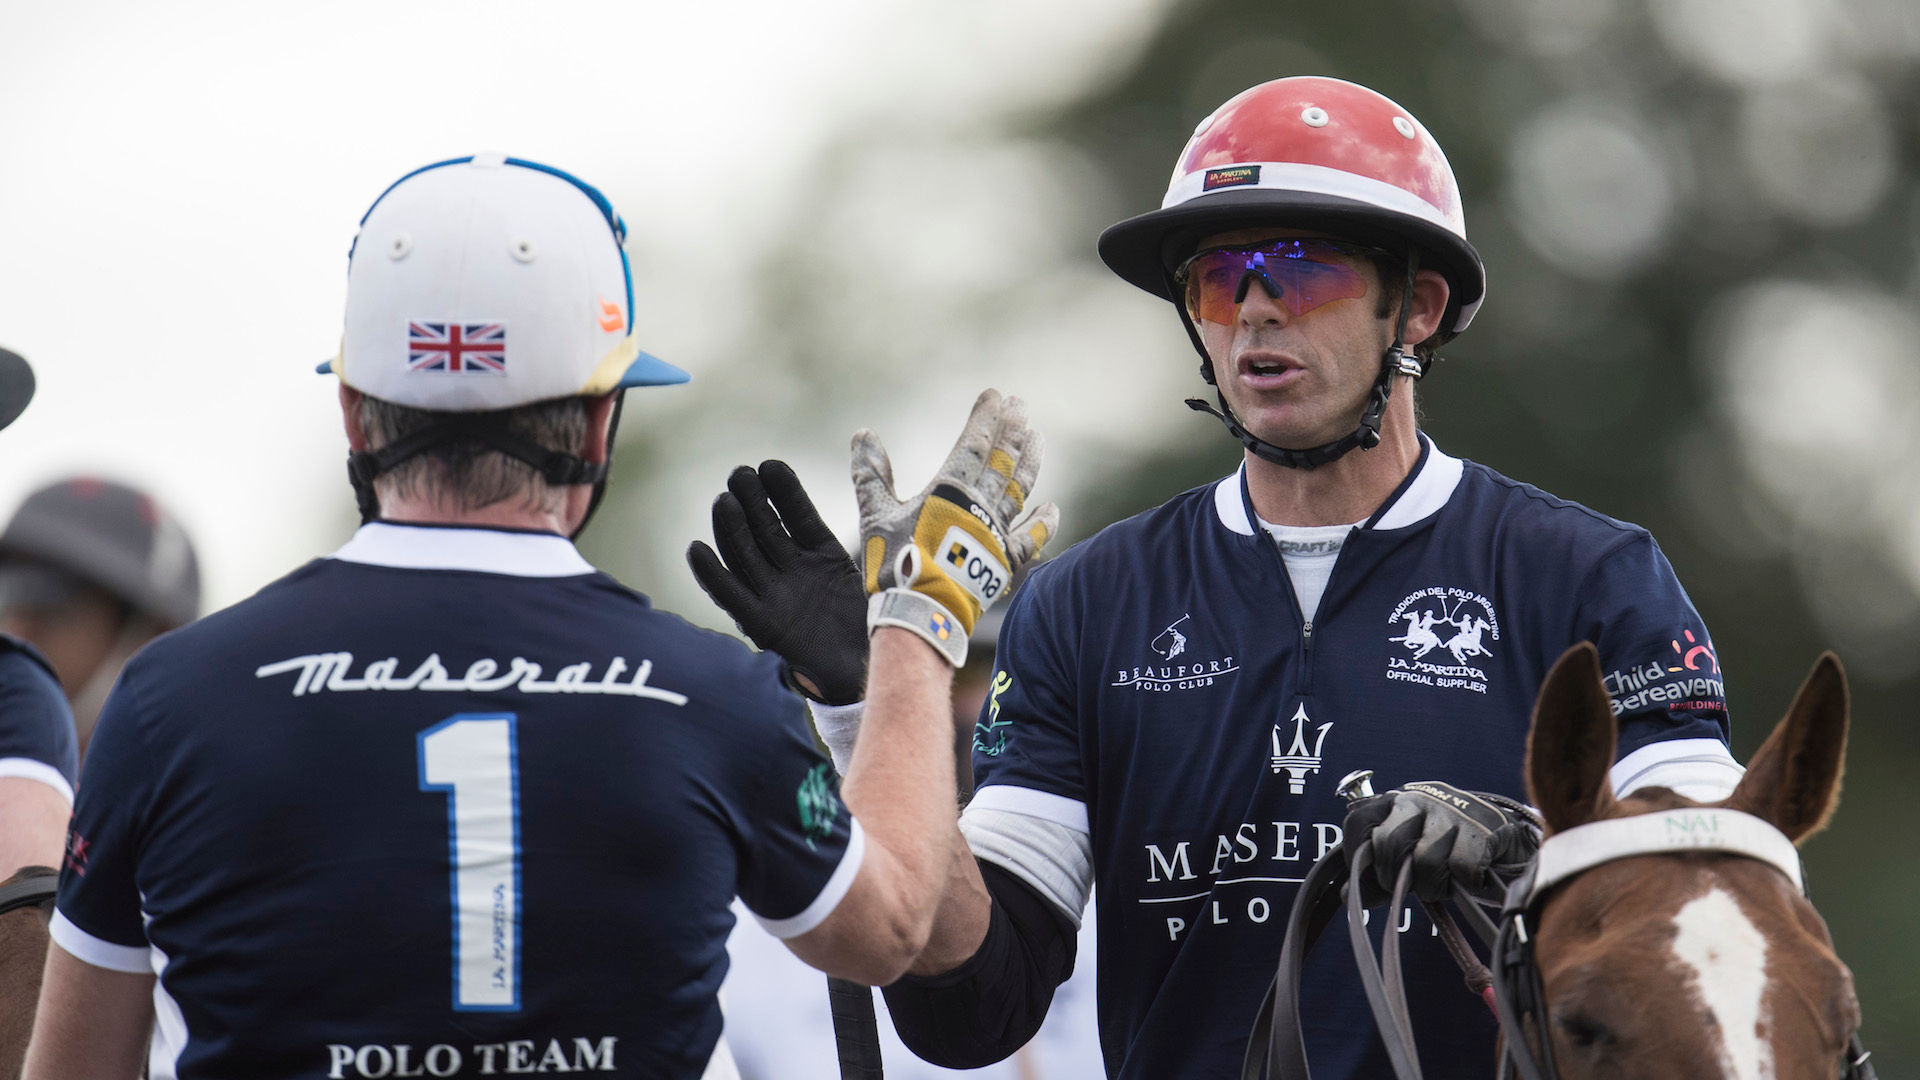 Maserati-Royal-Charity-Polo-Trophy-2017-at-Beaufort-Polo-Club_3